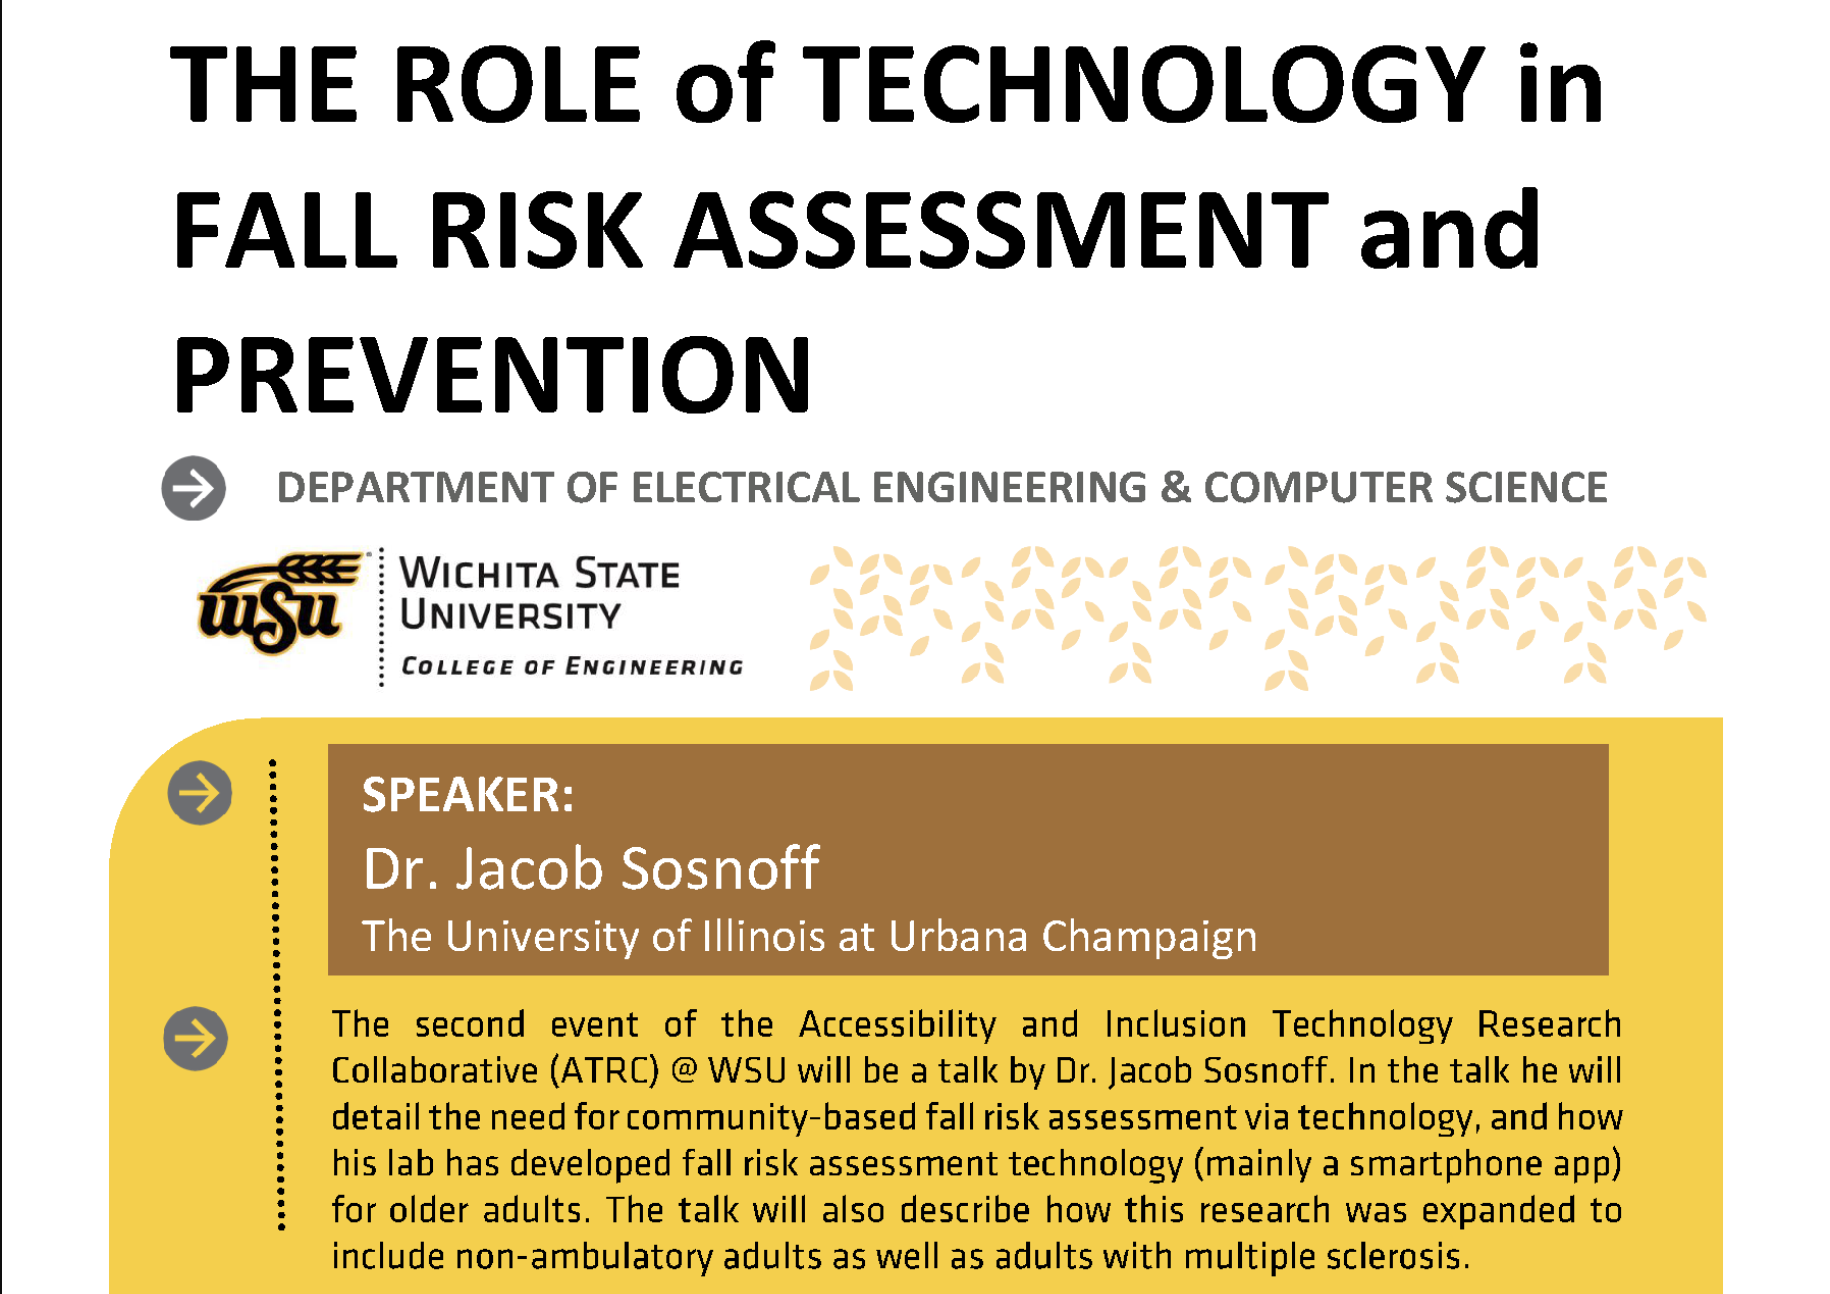 Attend an Accessibility and Inclusion Technology Research Collaborative talk from the department of Electrical Engineering & Computer Science